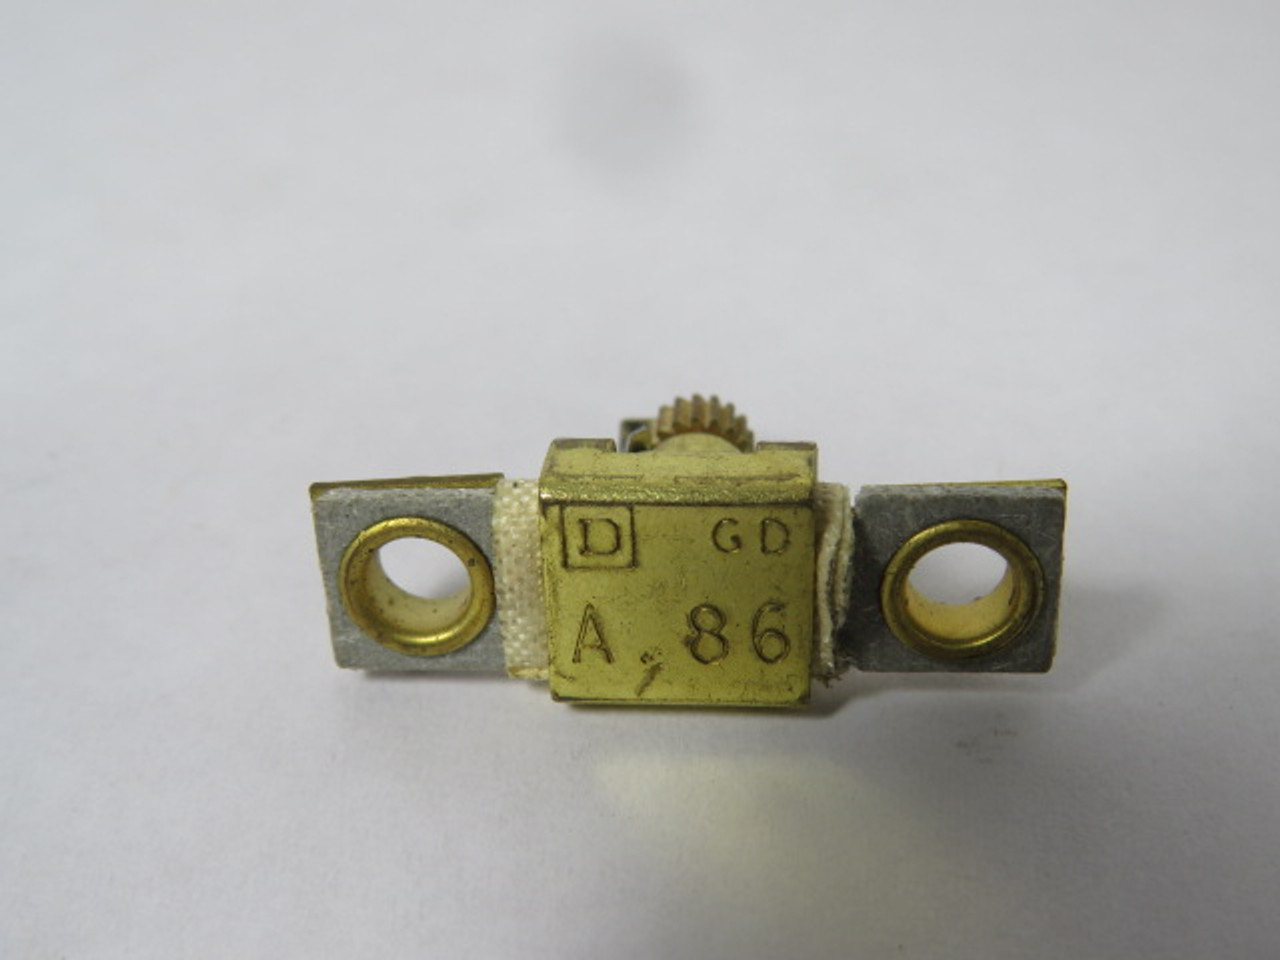 Square D A.86 Overload Relay Thermal Unit USED